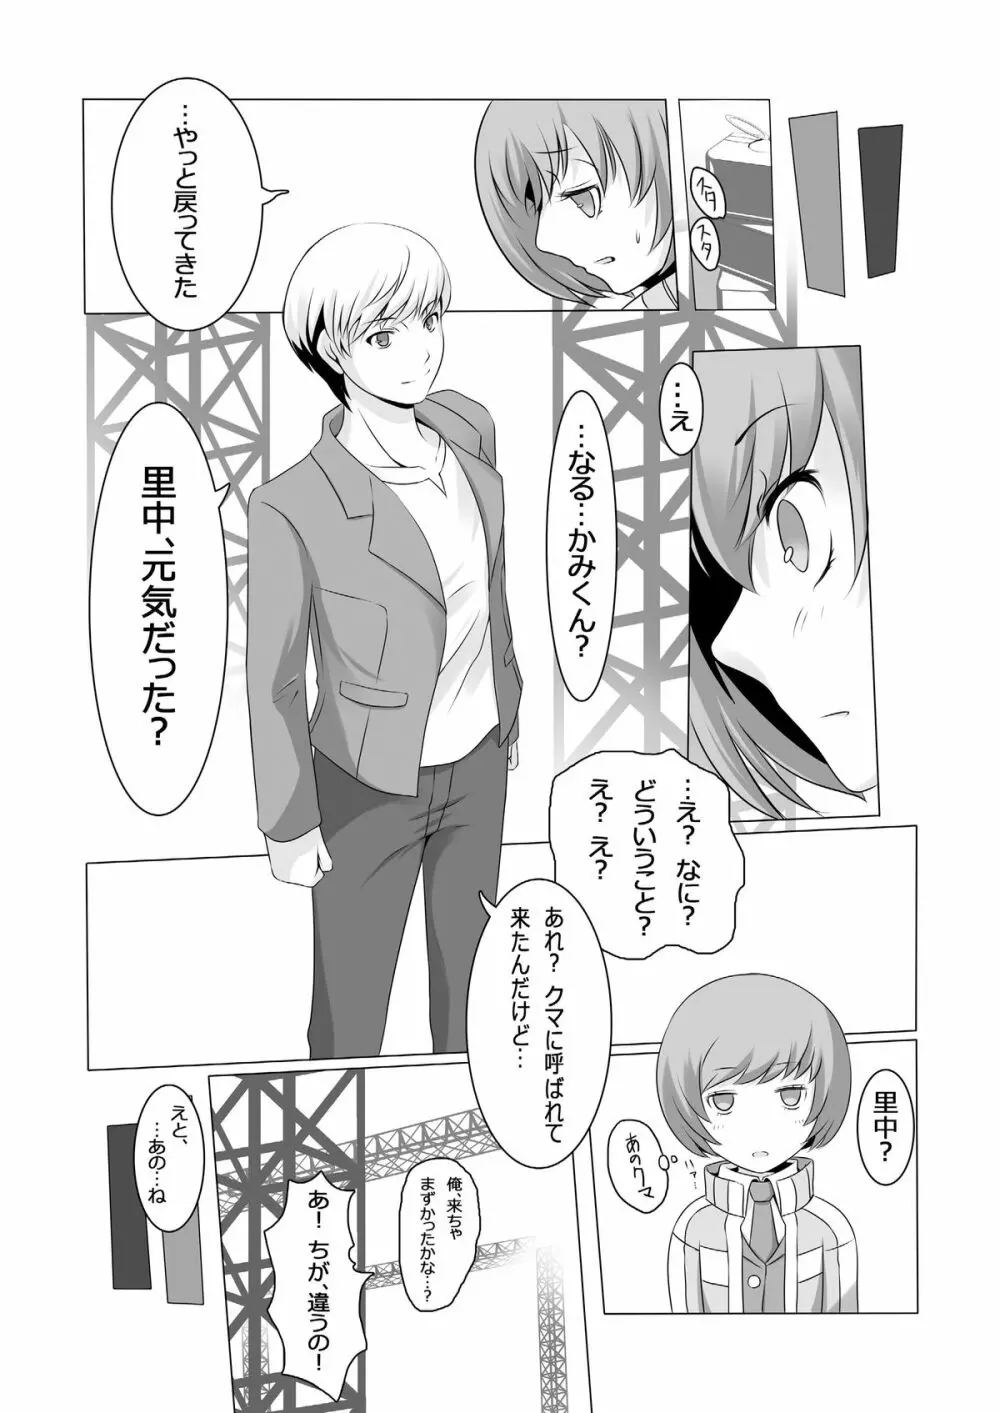 Persona 4: The Doujin #2 - page12